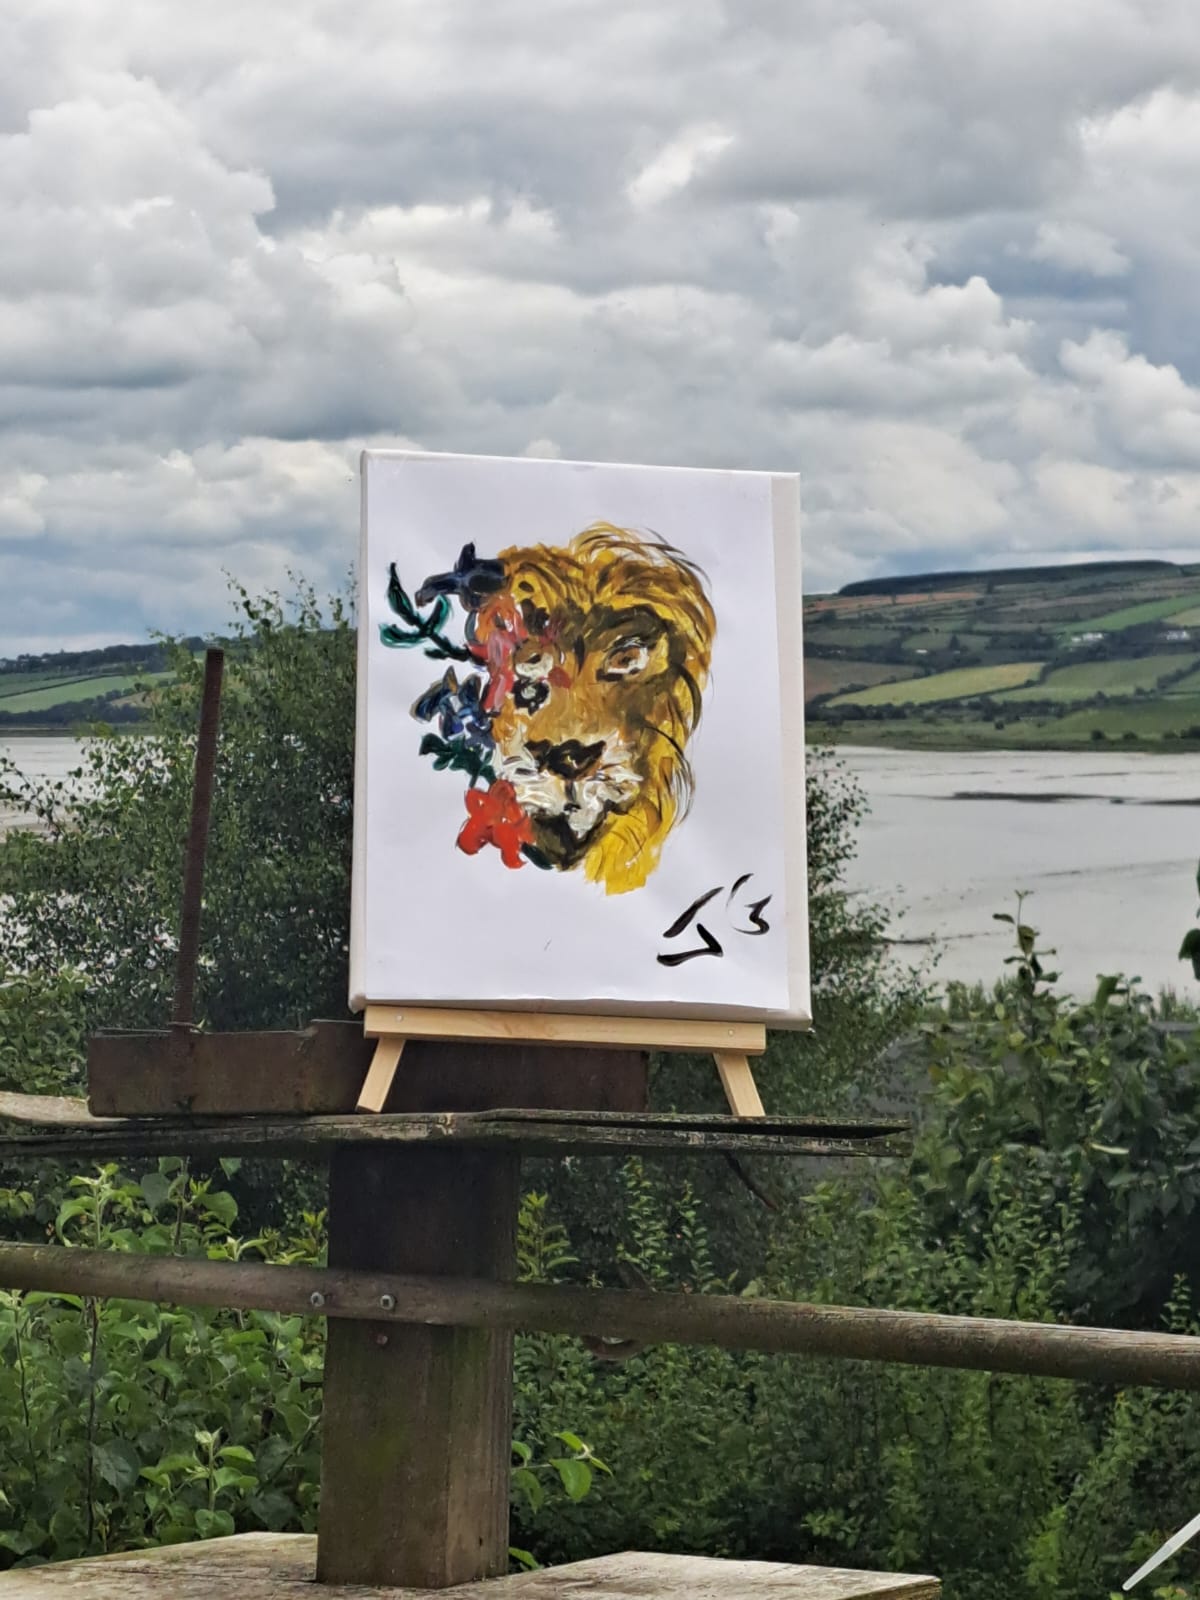 Image of a canvas with a painting of a lion against a background showing the Irish countryside, with a hill and lake and cloudy sky 